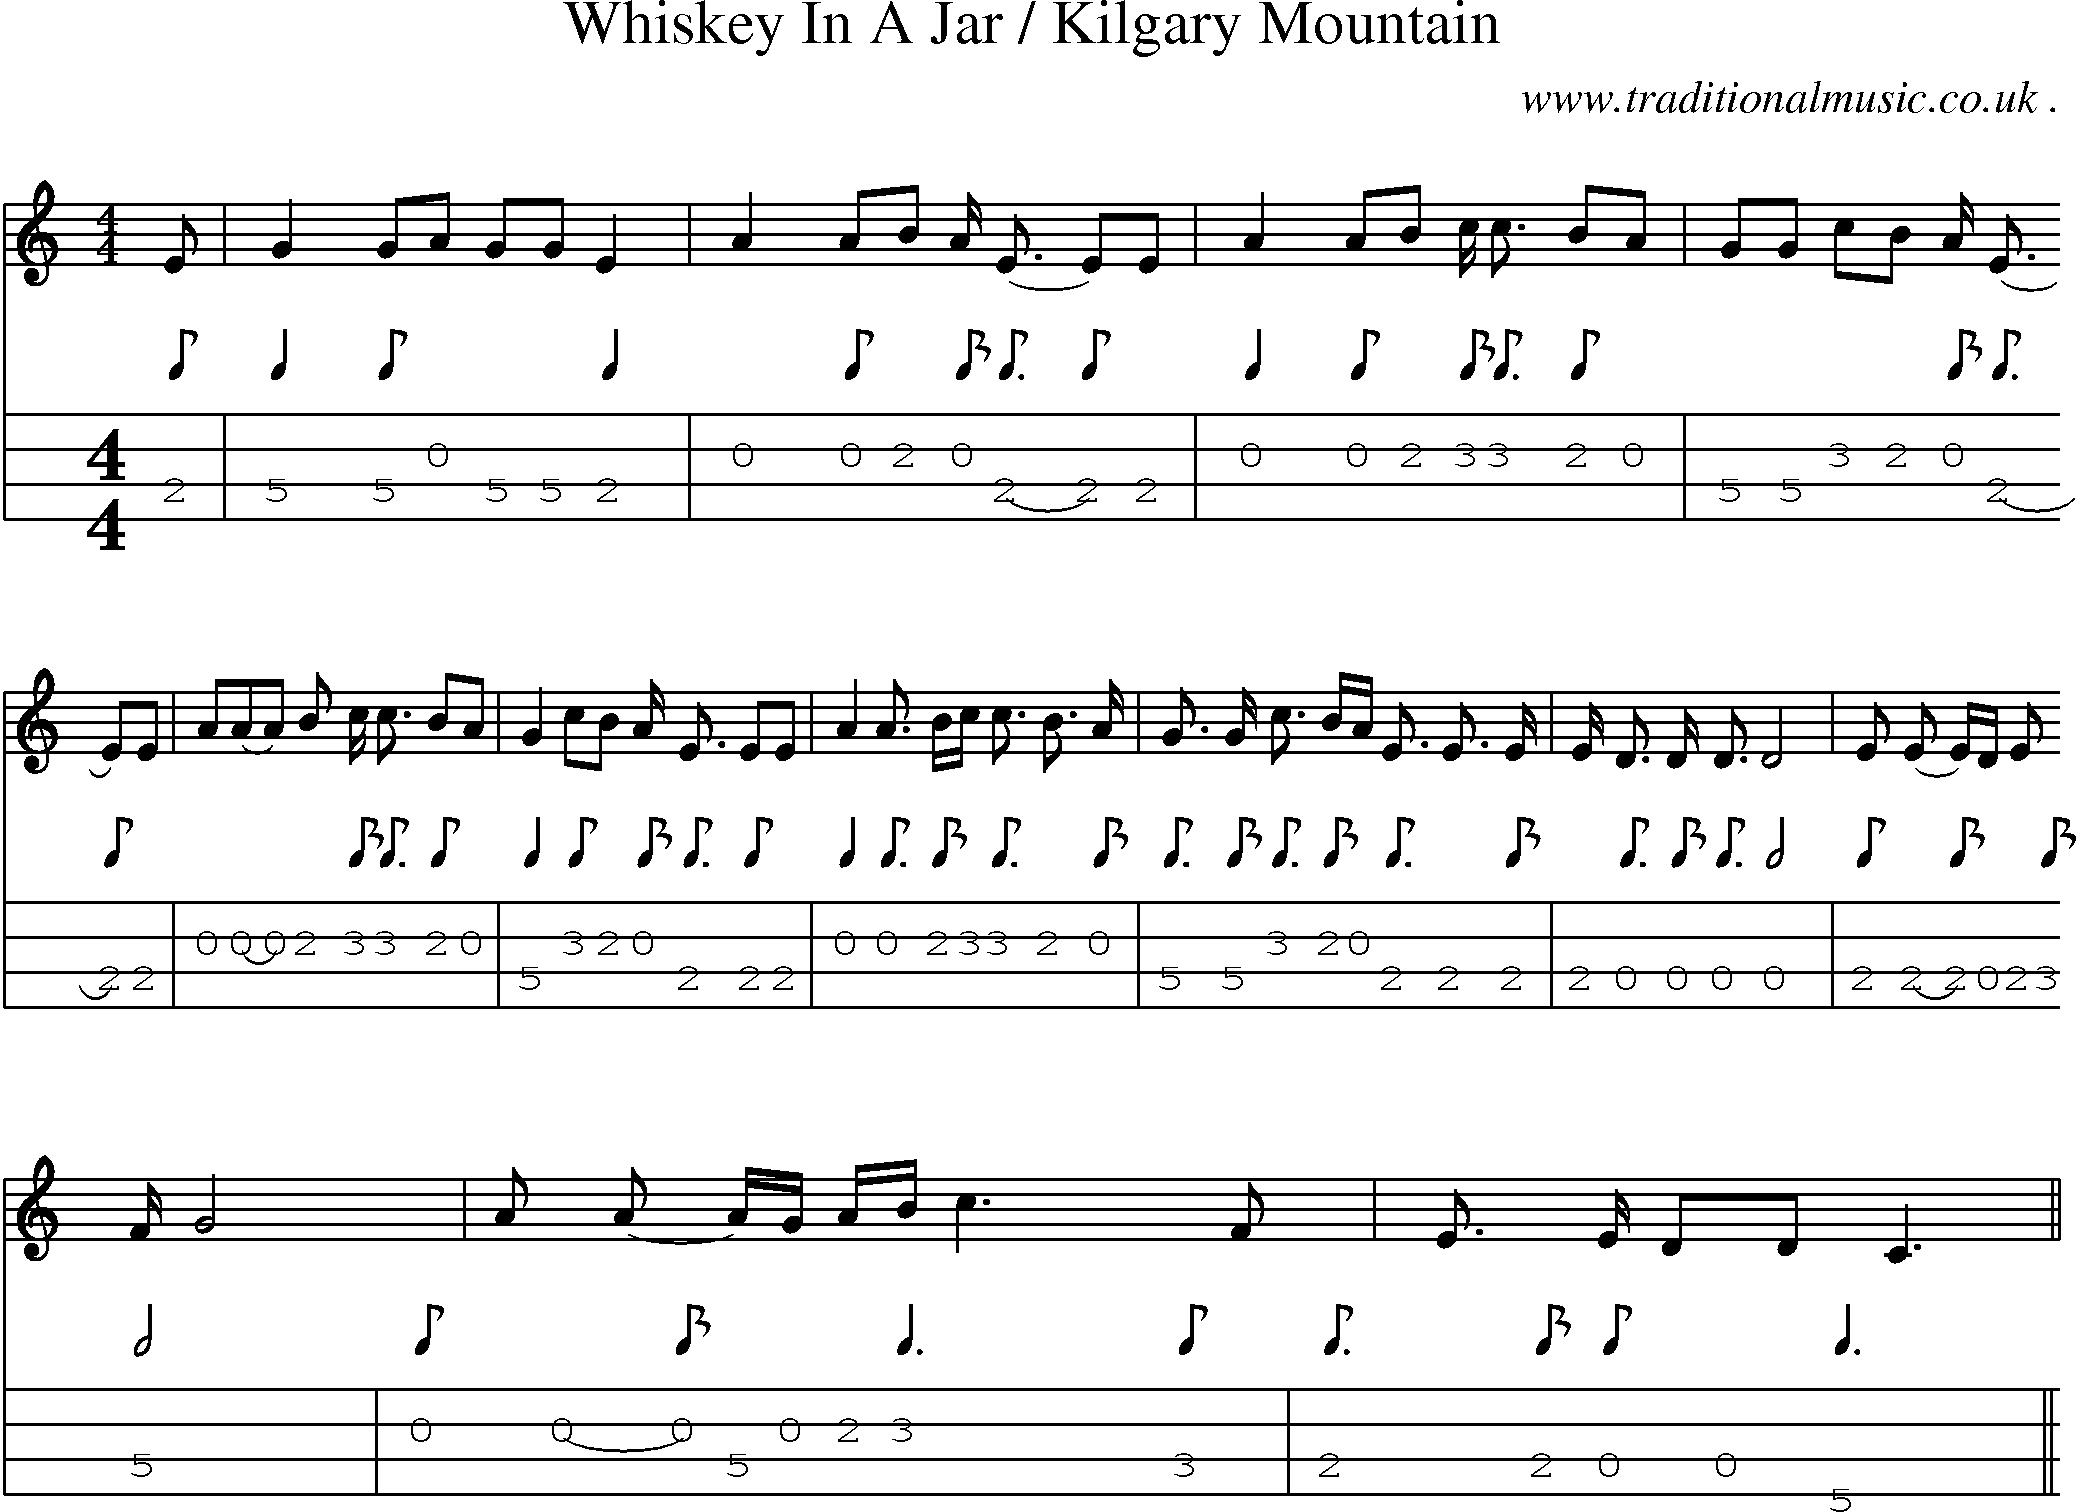 Sheet-music  score, Chords and Mandolin Tabs for Whiskey In A Jar Kilgary Mountain